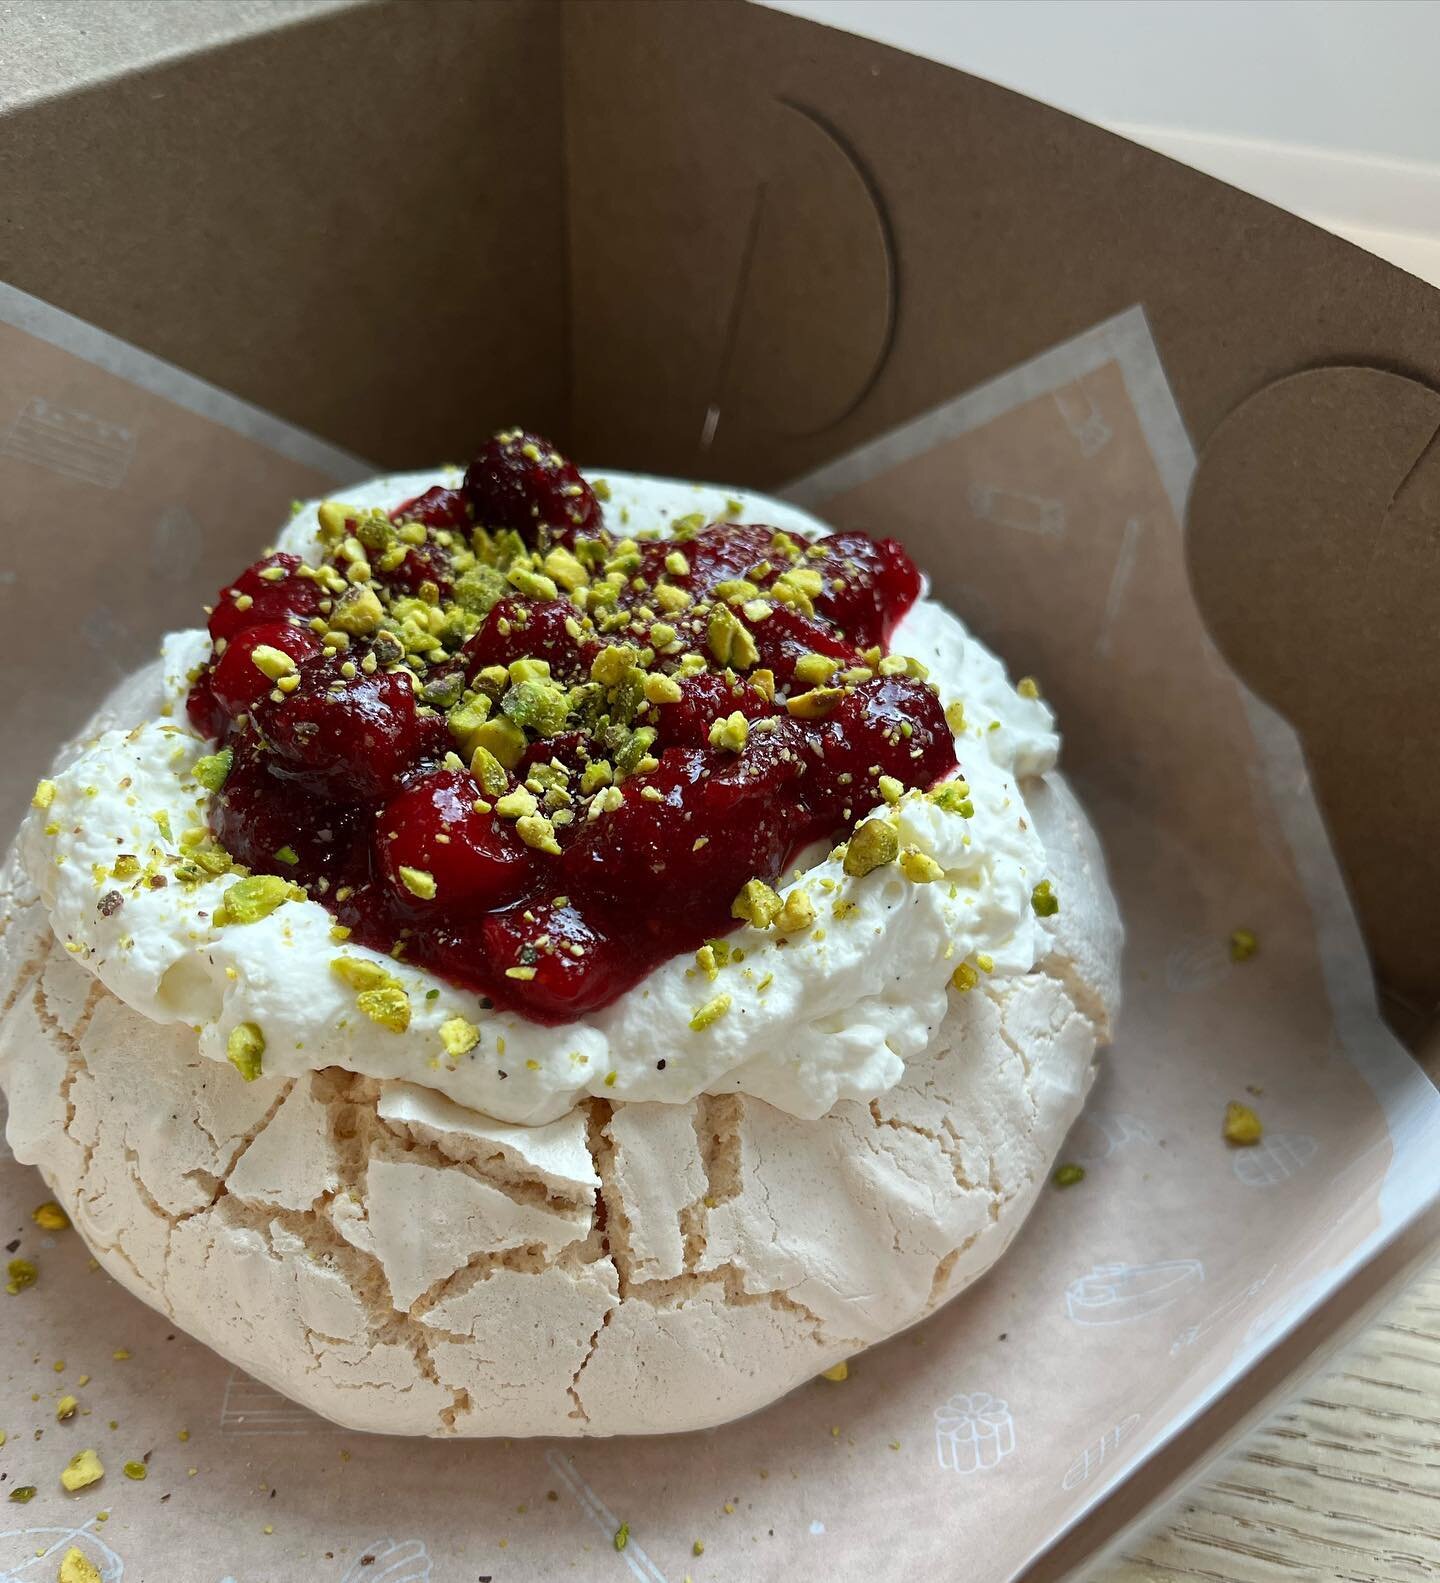 We&rsquo;ve taken inspiration for our next pavlova from the traditional thanksgiving dinner, where the ubiquitous cranberry sauce is a welcome bright addition to the plate.⁣
⁣
Plump cranberries are cooked slowly with vanilla, plenty of orange zest &a